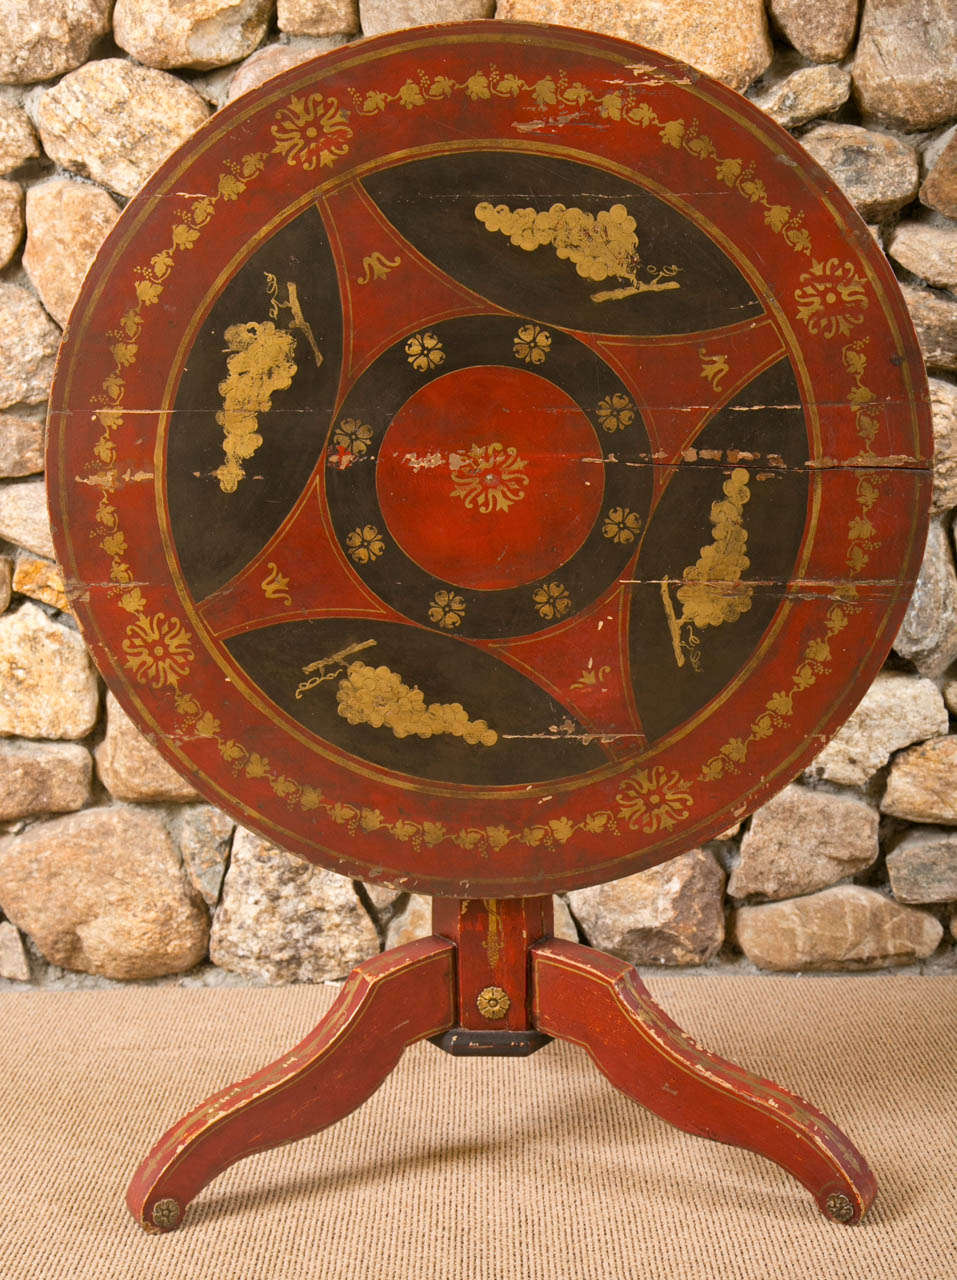 Continental Painted Wood tilt top Circular Center Hall Table, mid 19th century,  the wonderful design in colors of red and yellow on a dark ground, on a tripod base